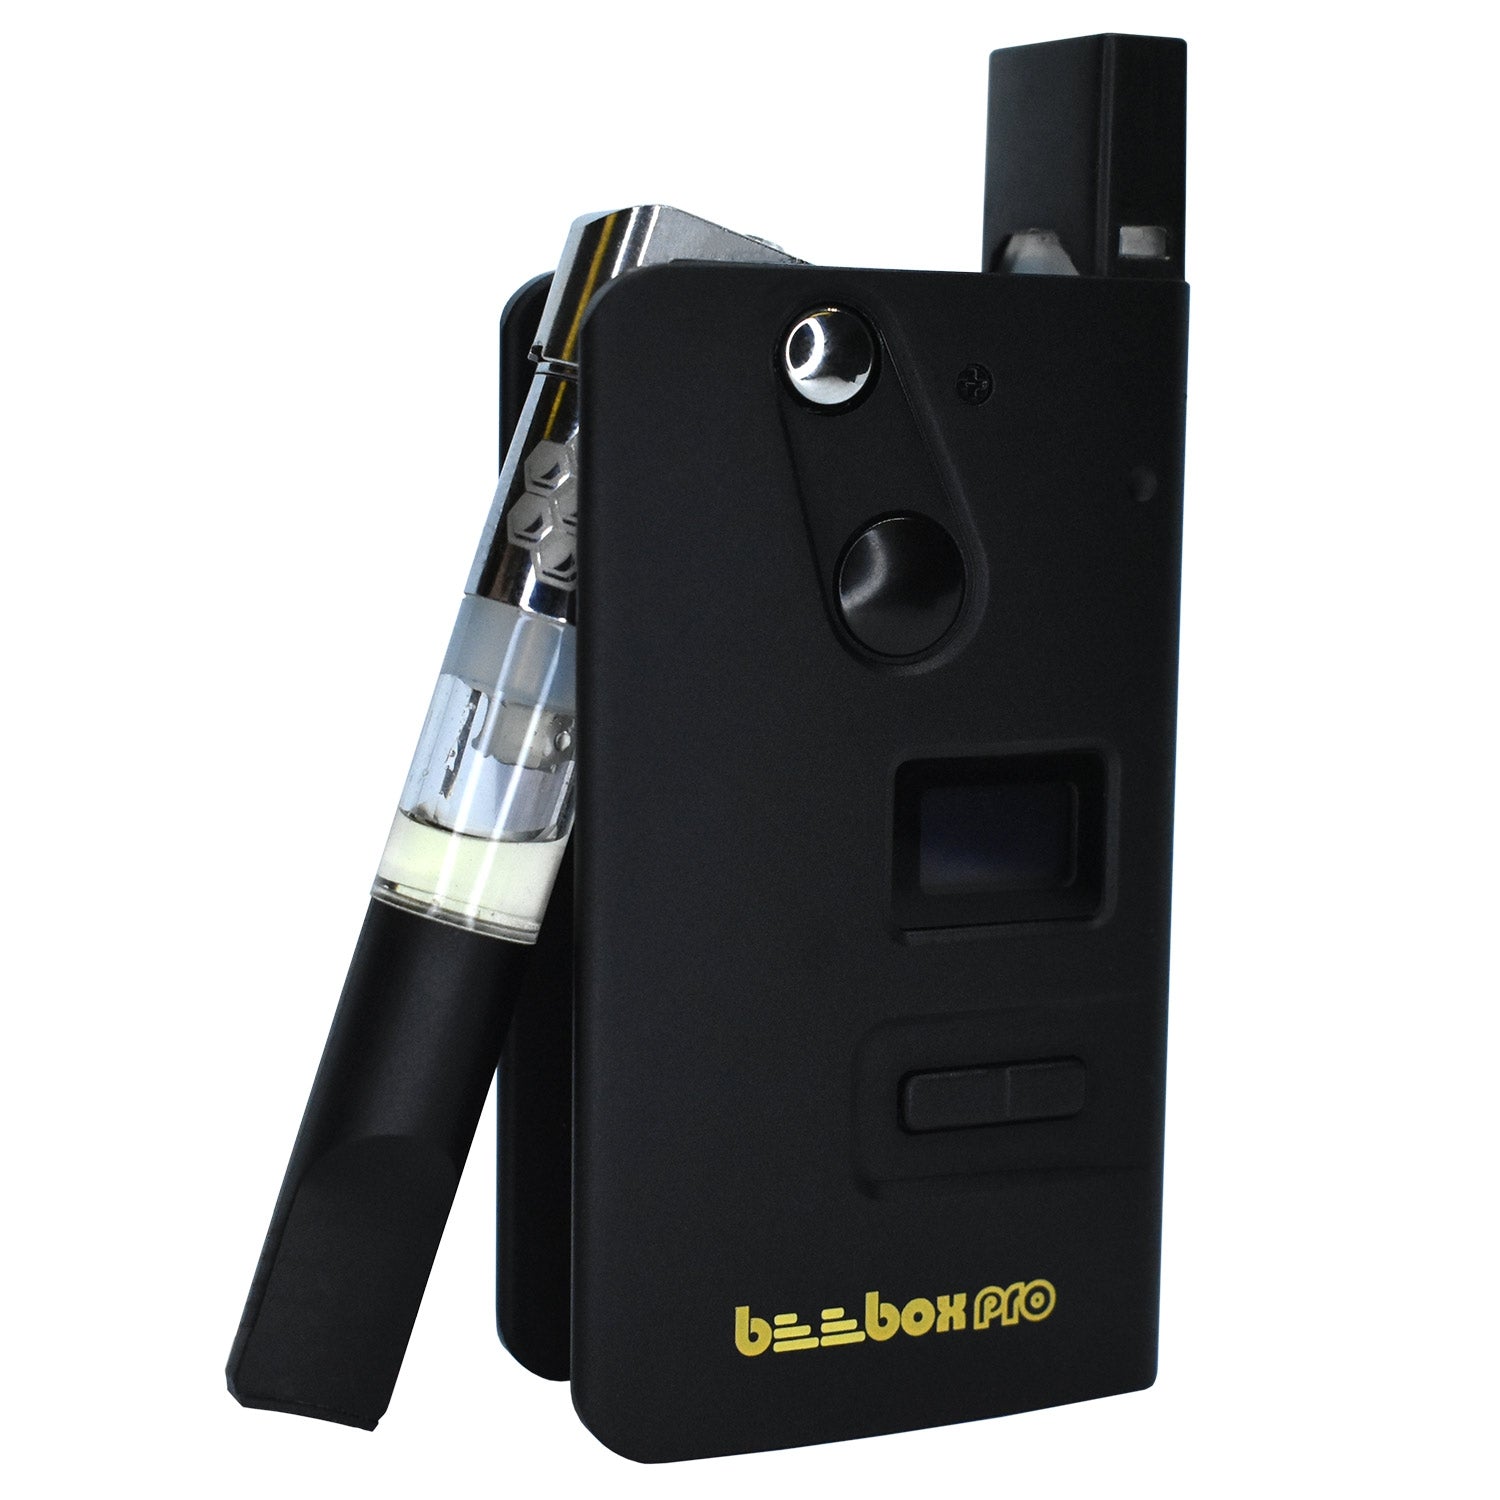 BeeBox PRO Vaporizer for POD and 510 Cartridges